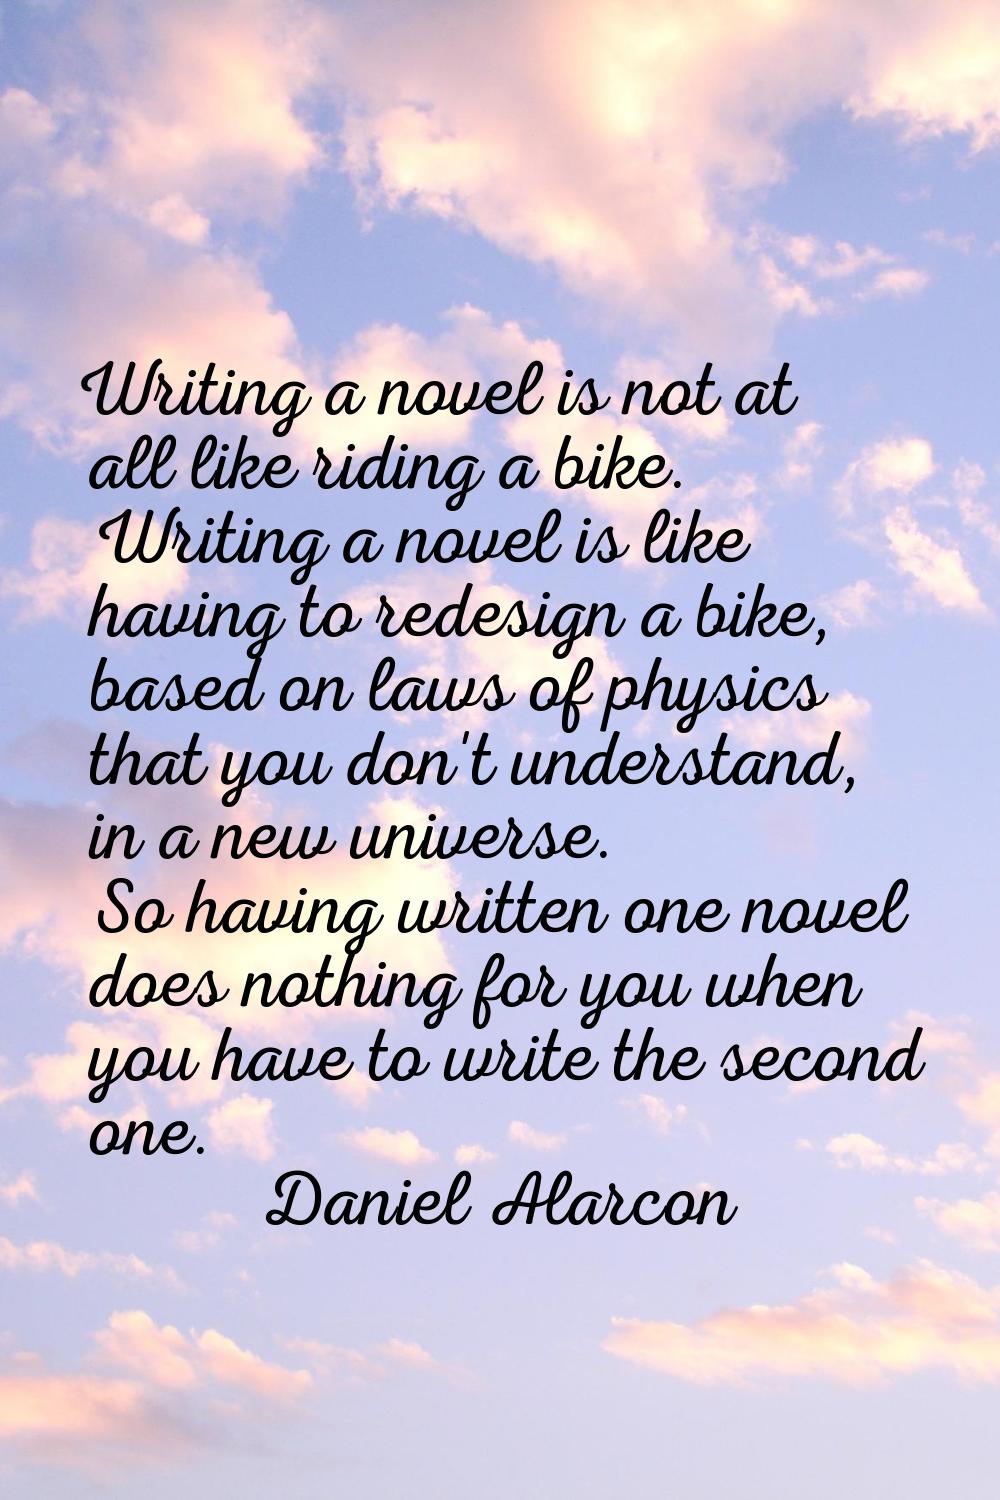 Writing a novel is not at all like riding a bike. Writing a novel is like having to redesign a bike